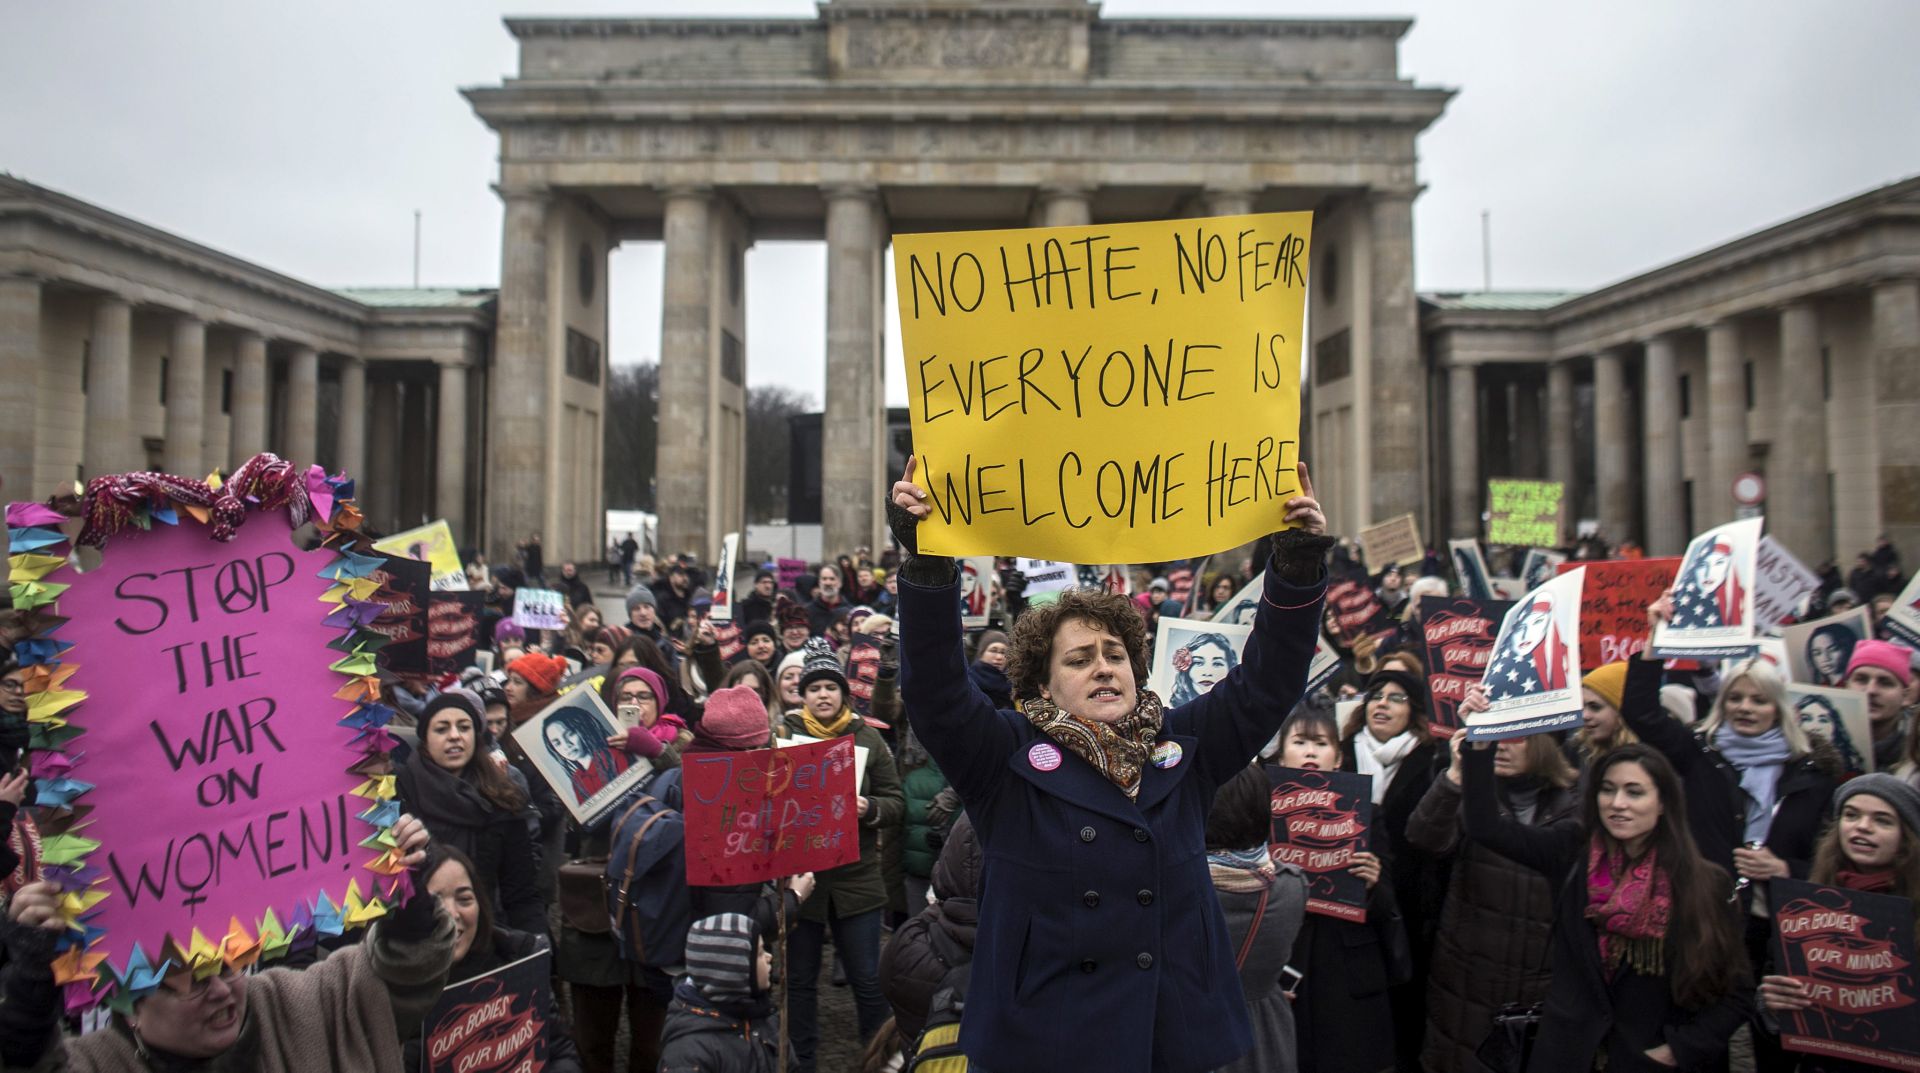 epa05738213 People protest in front of the Brandenburg Gate in Berlin, Germany, 21 January 2017. Dozens of protestors demanded equal rights for women. Hundreds of rallies are due to take place in over 30 countries around the world following the inauguration of US President Donald Trump.  EPA/OLIVER WEIKEN